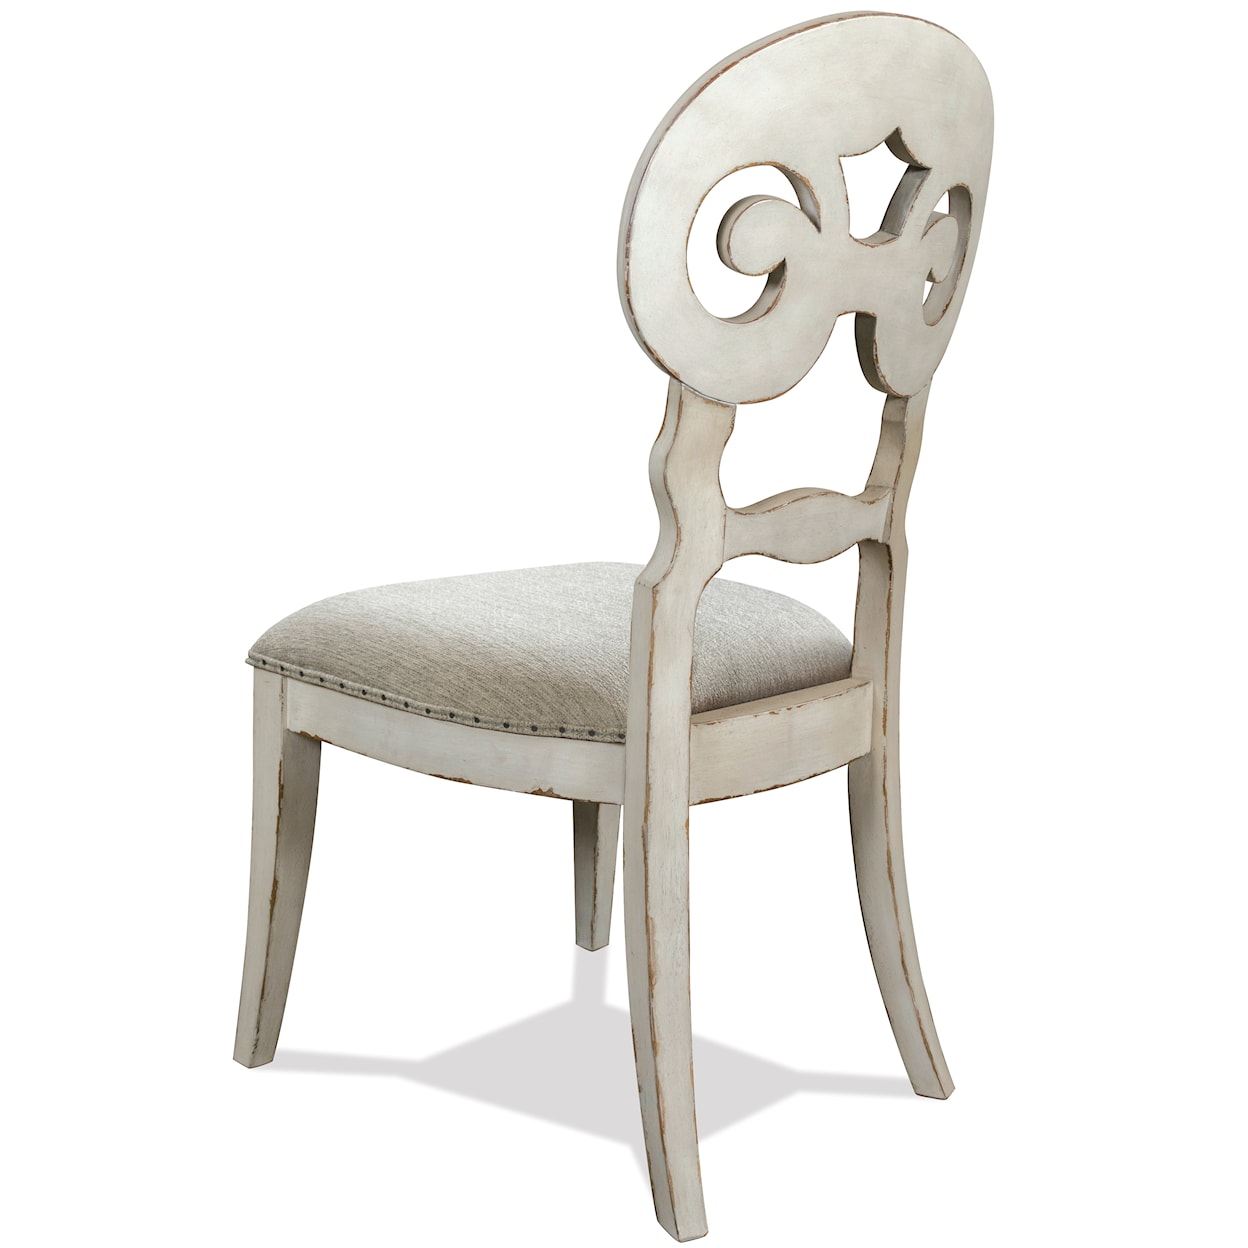 Riverside Furniture Mix and Match Scroll Back Upholstered Side Chair